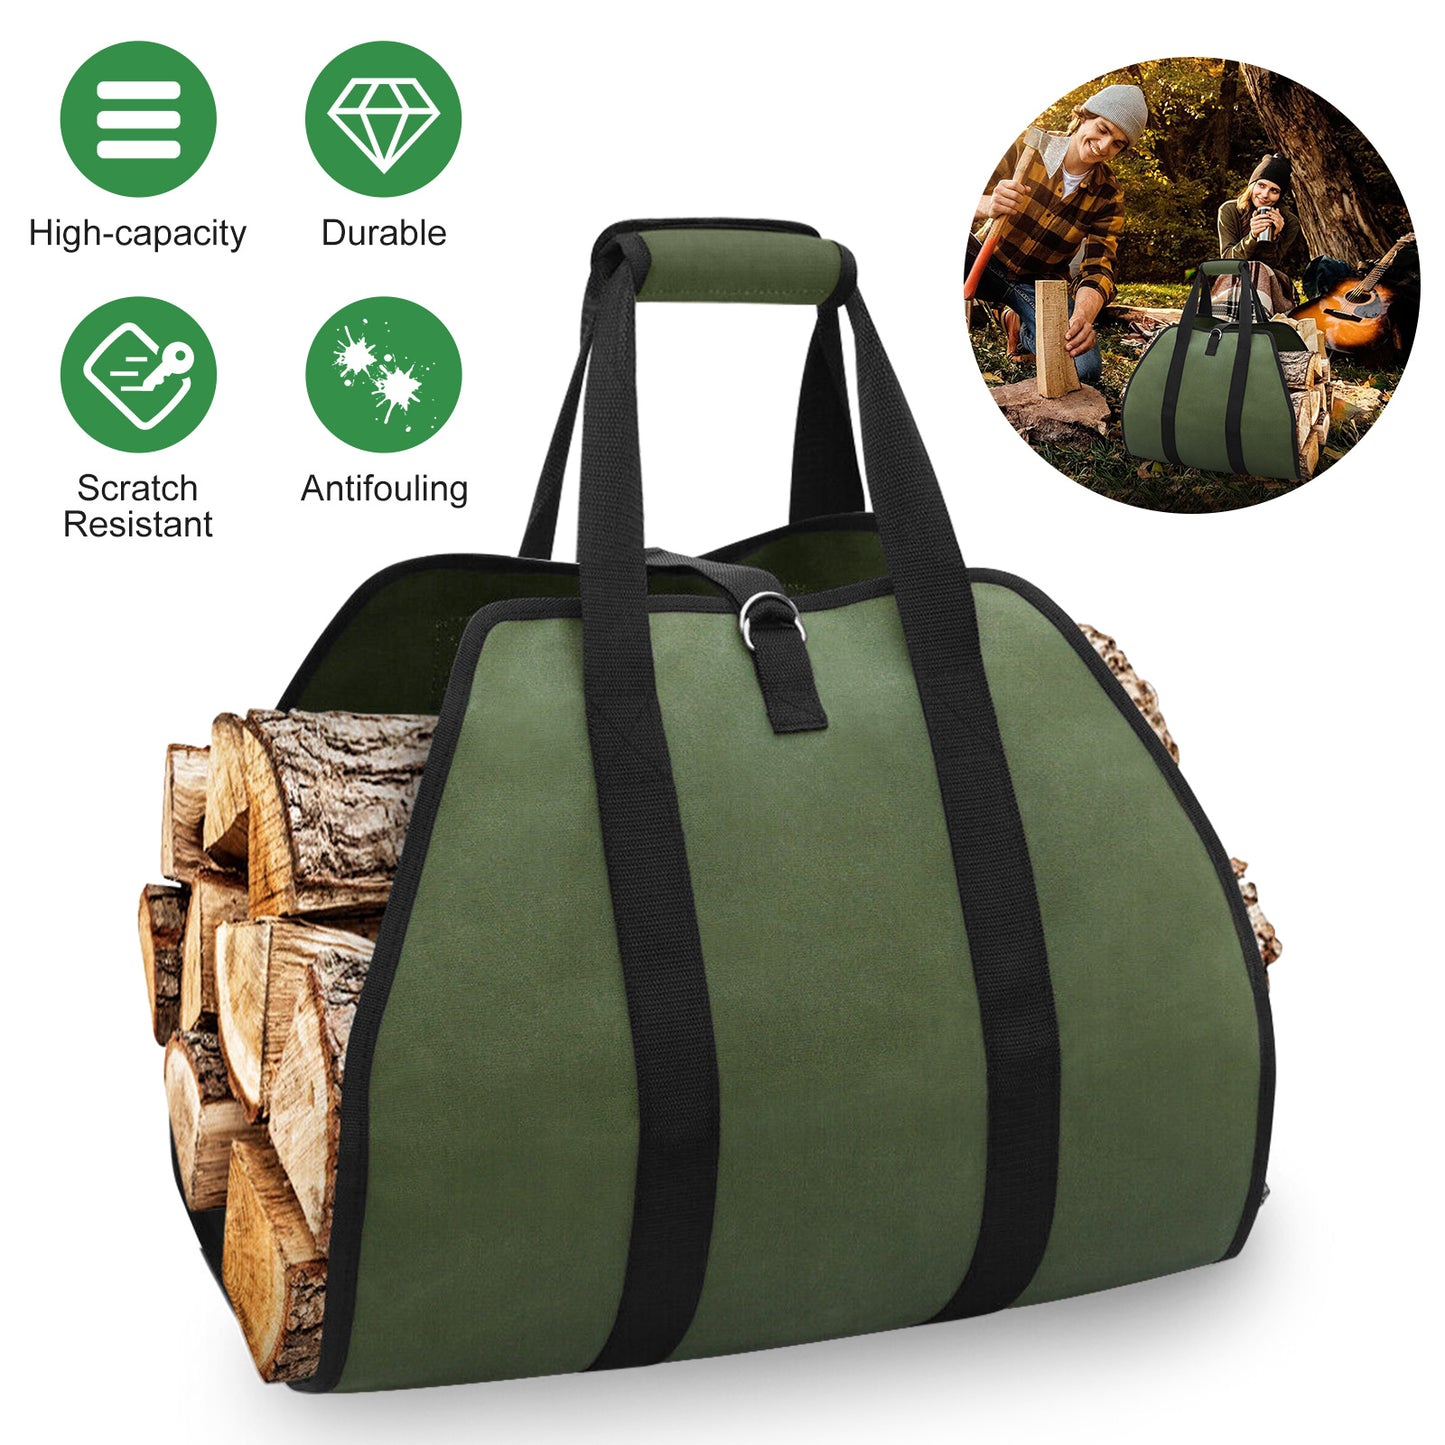 Canvas Firewood Log Carrier - Durable Tote for Stove and Fireplace Accessories (Green)